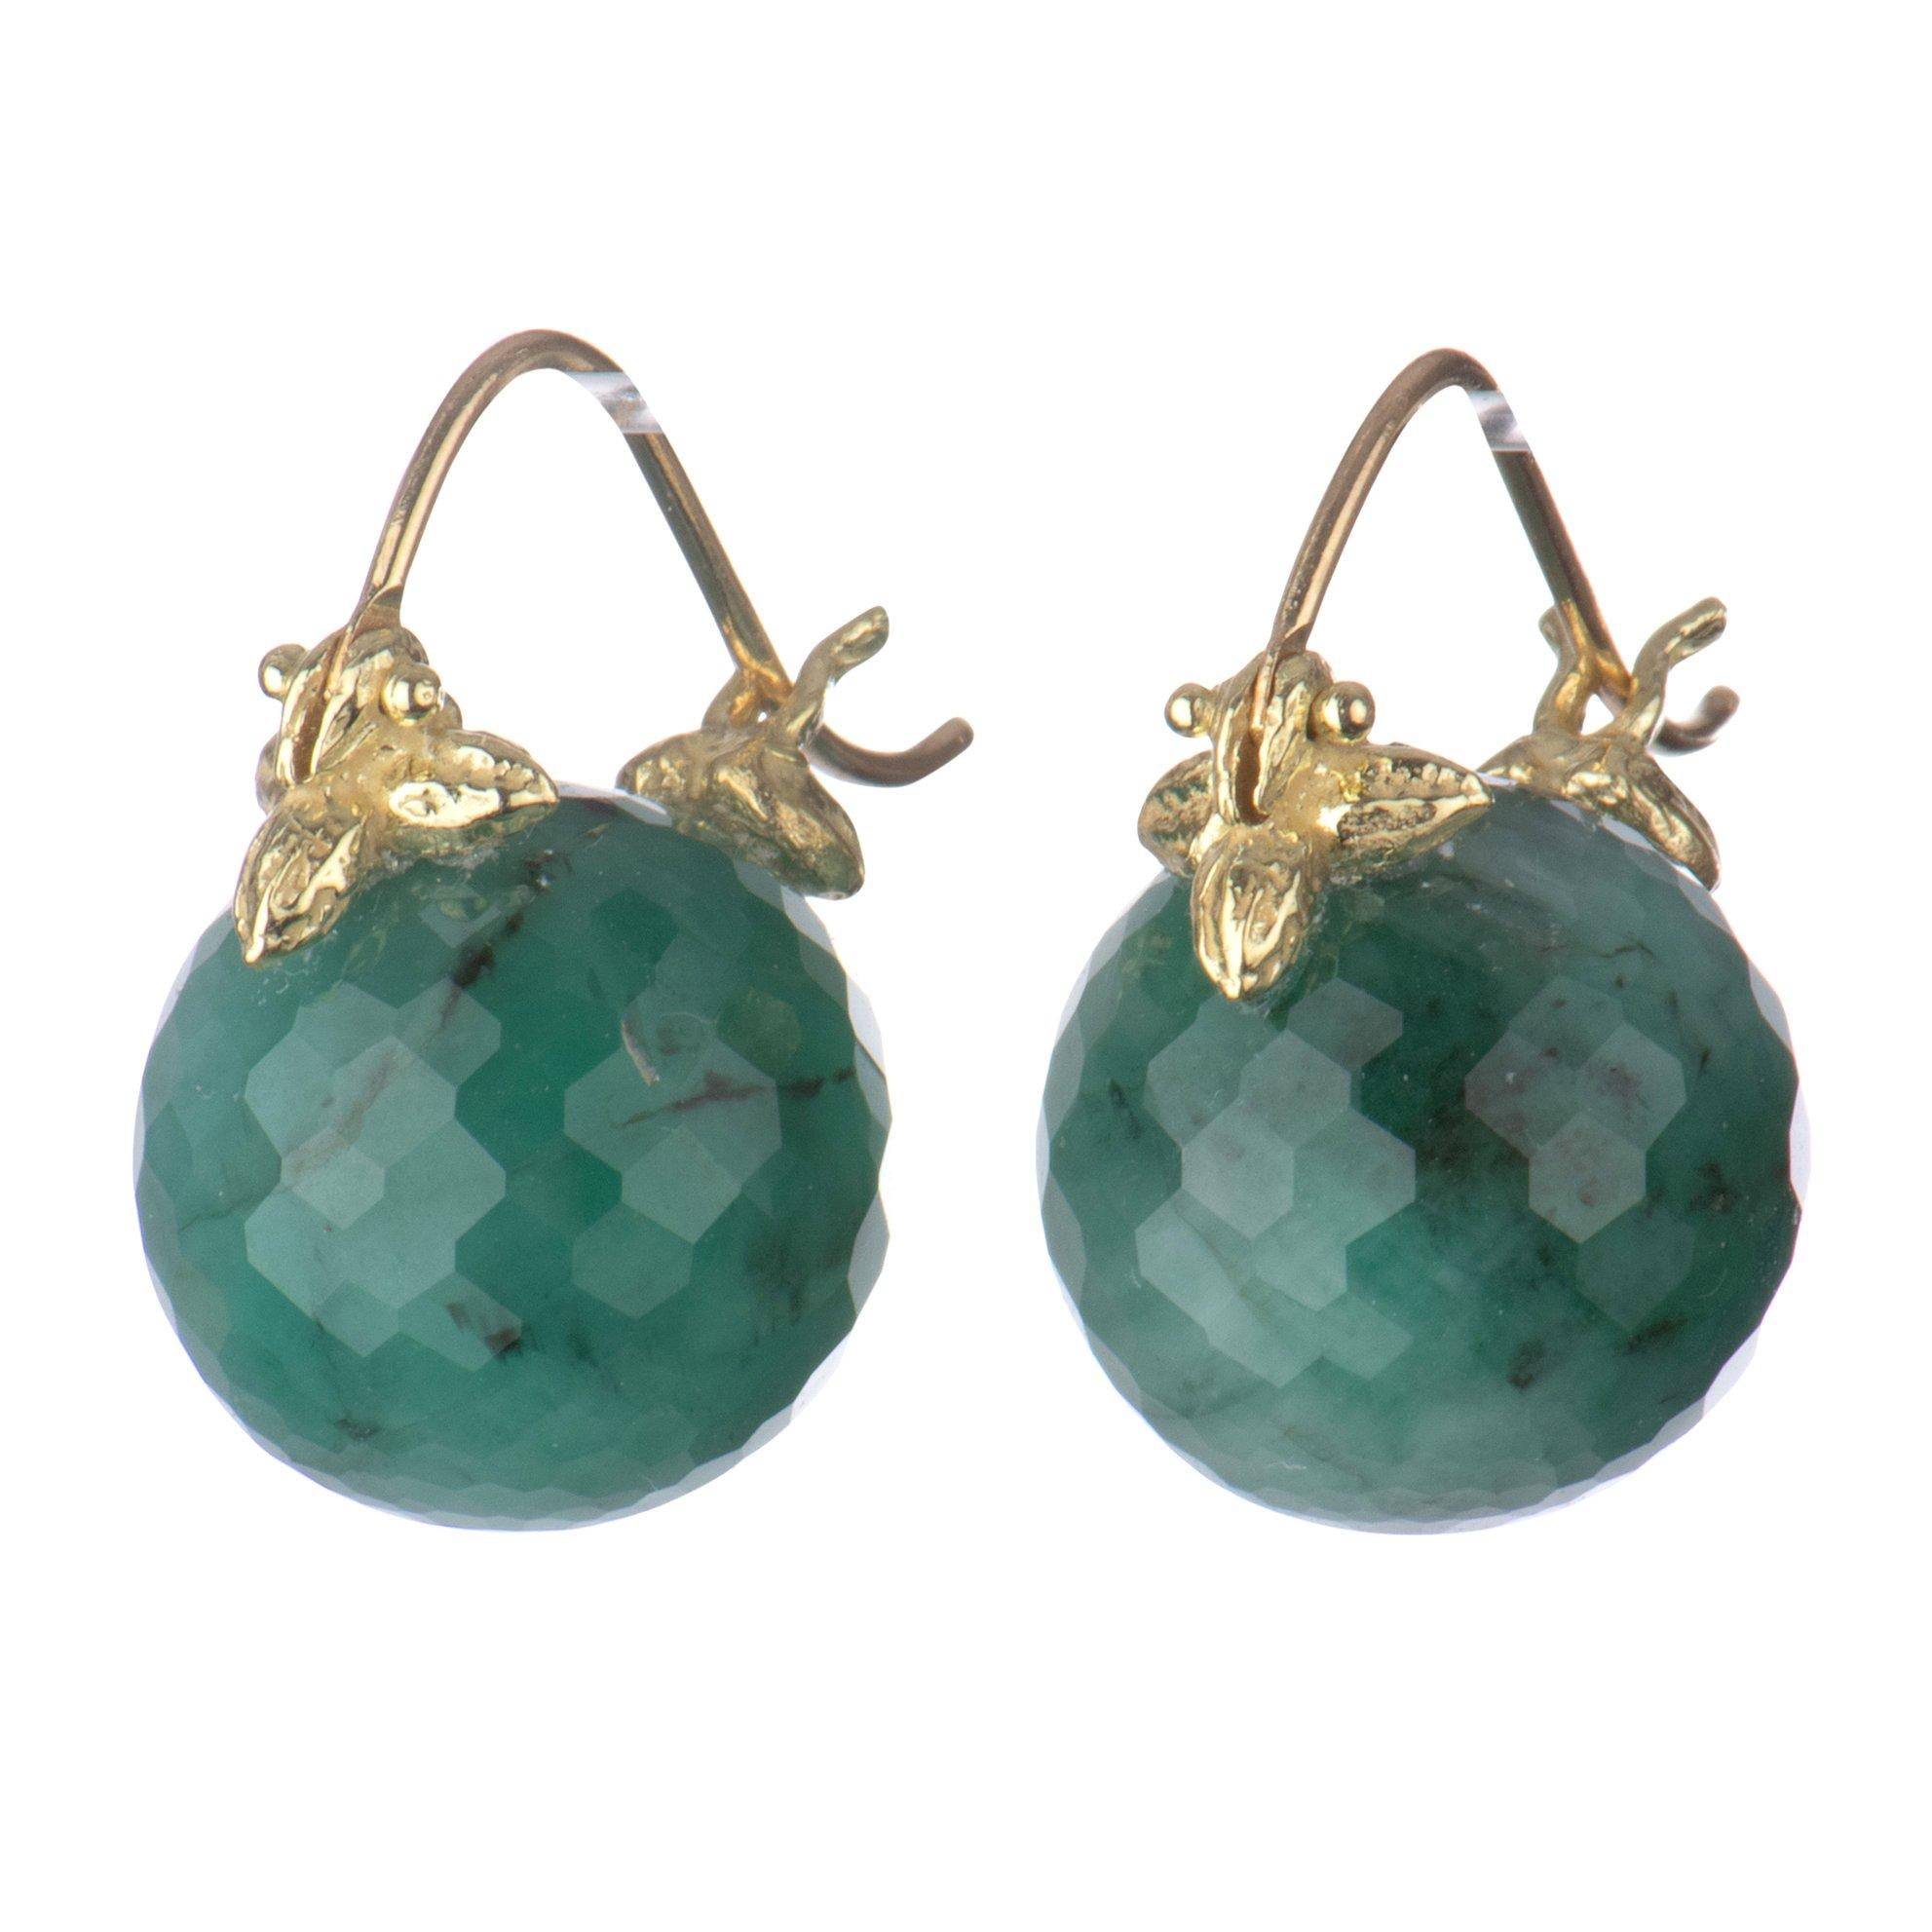 The stunning green that is emerald is a show-stopper in these faceted round drops, kissed with matrix shadows and clasped just so by Gabrielle's 18k Flyer setting.

12mm faceted emerald 18K Flyer earrings